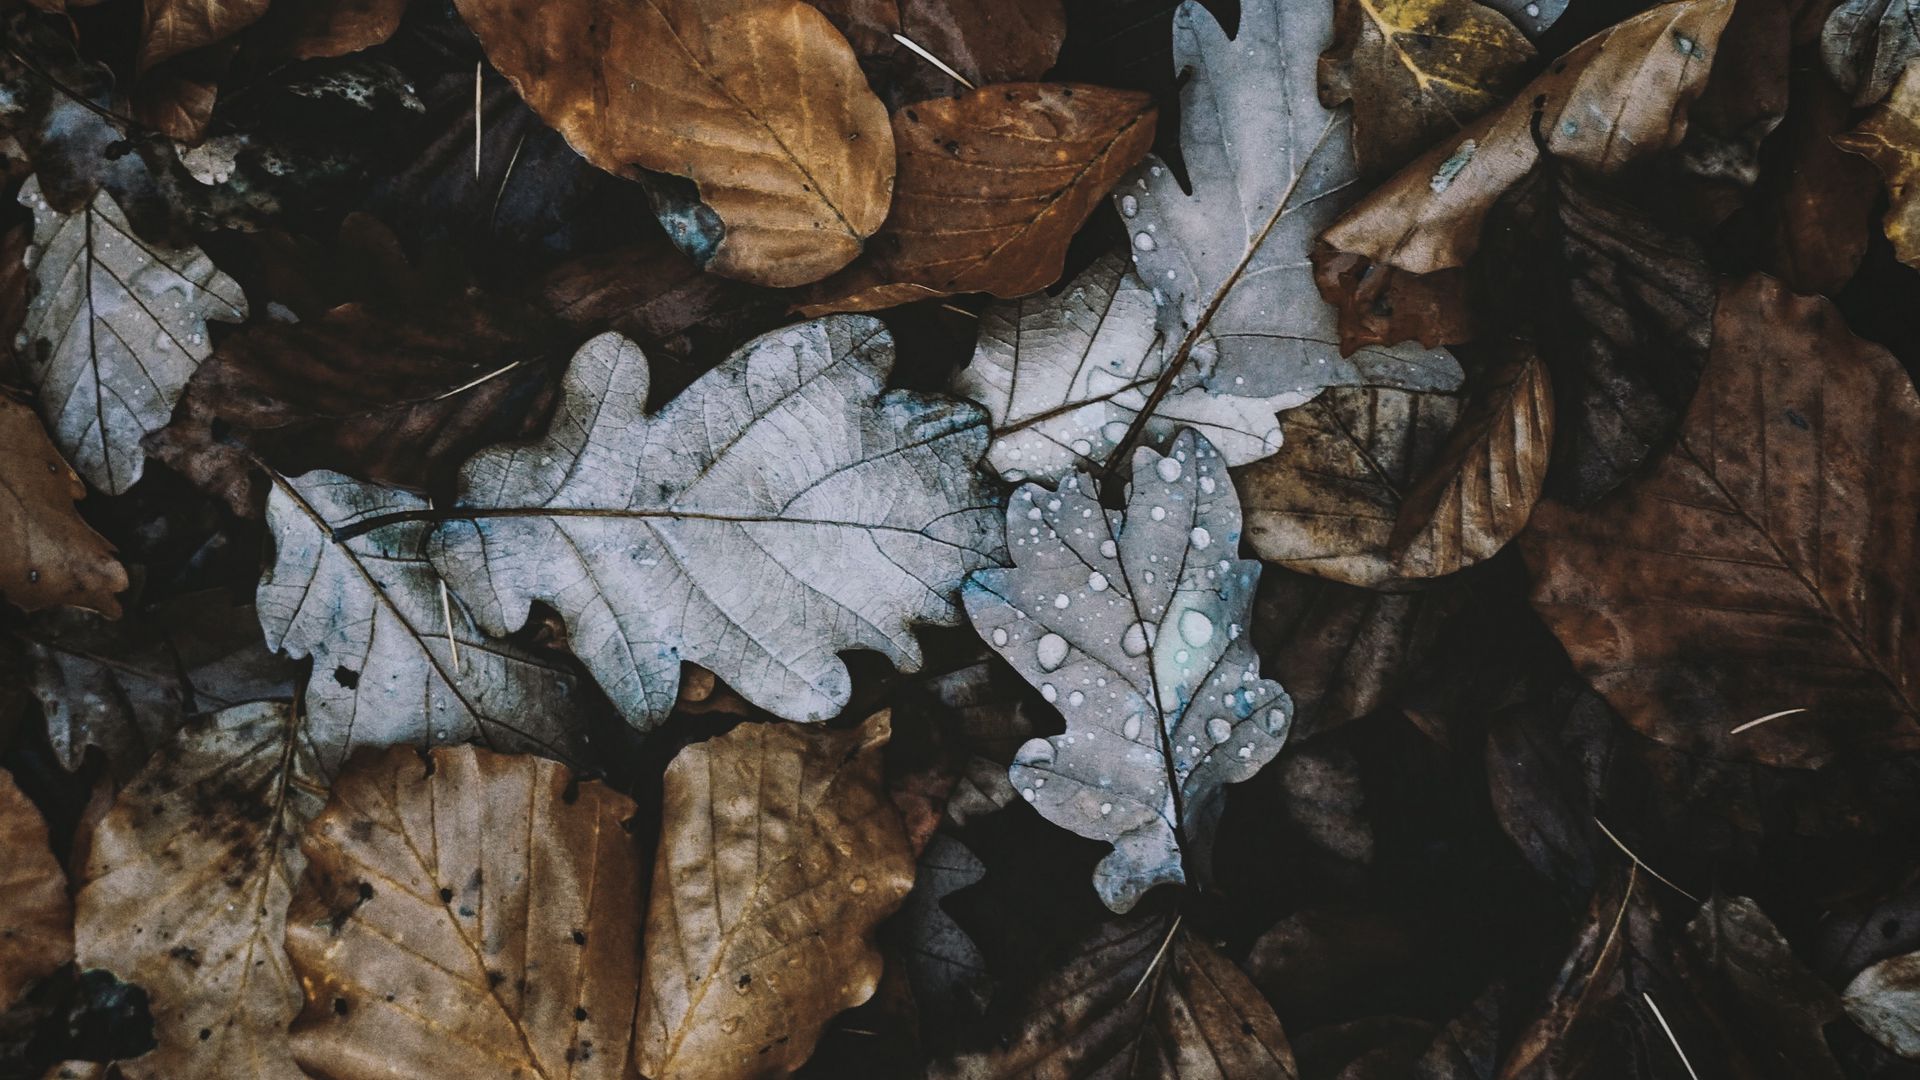 Download wallpaper 1920x1080 leaves, autumn, foliage, dry full hd, hdtv ...